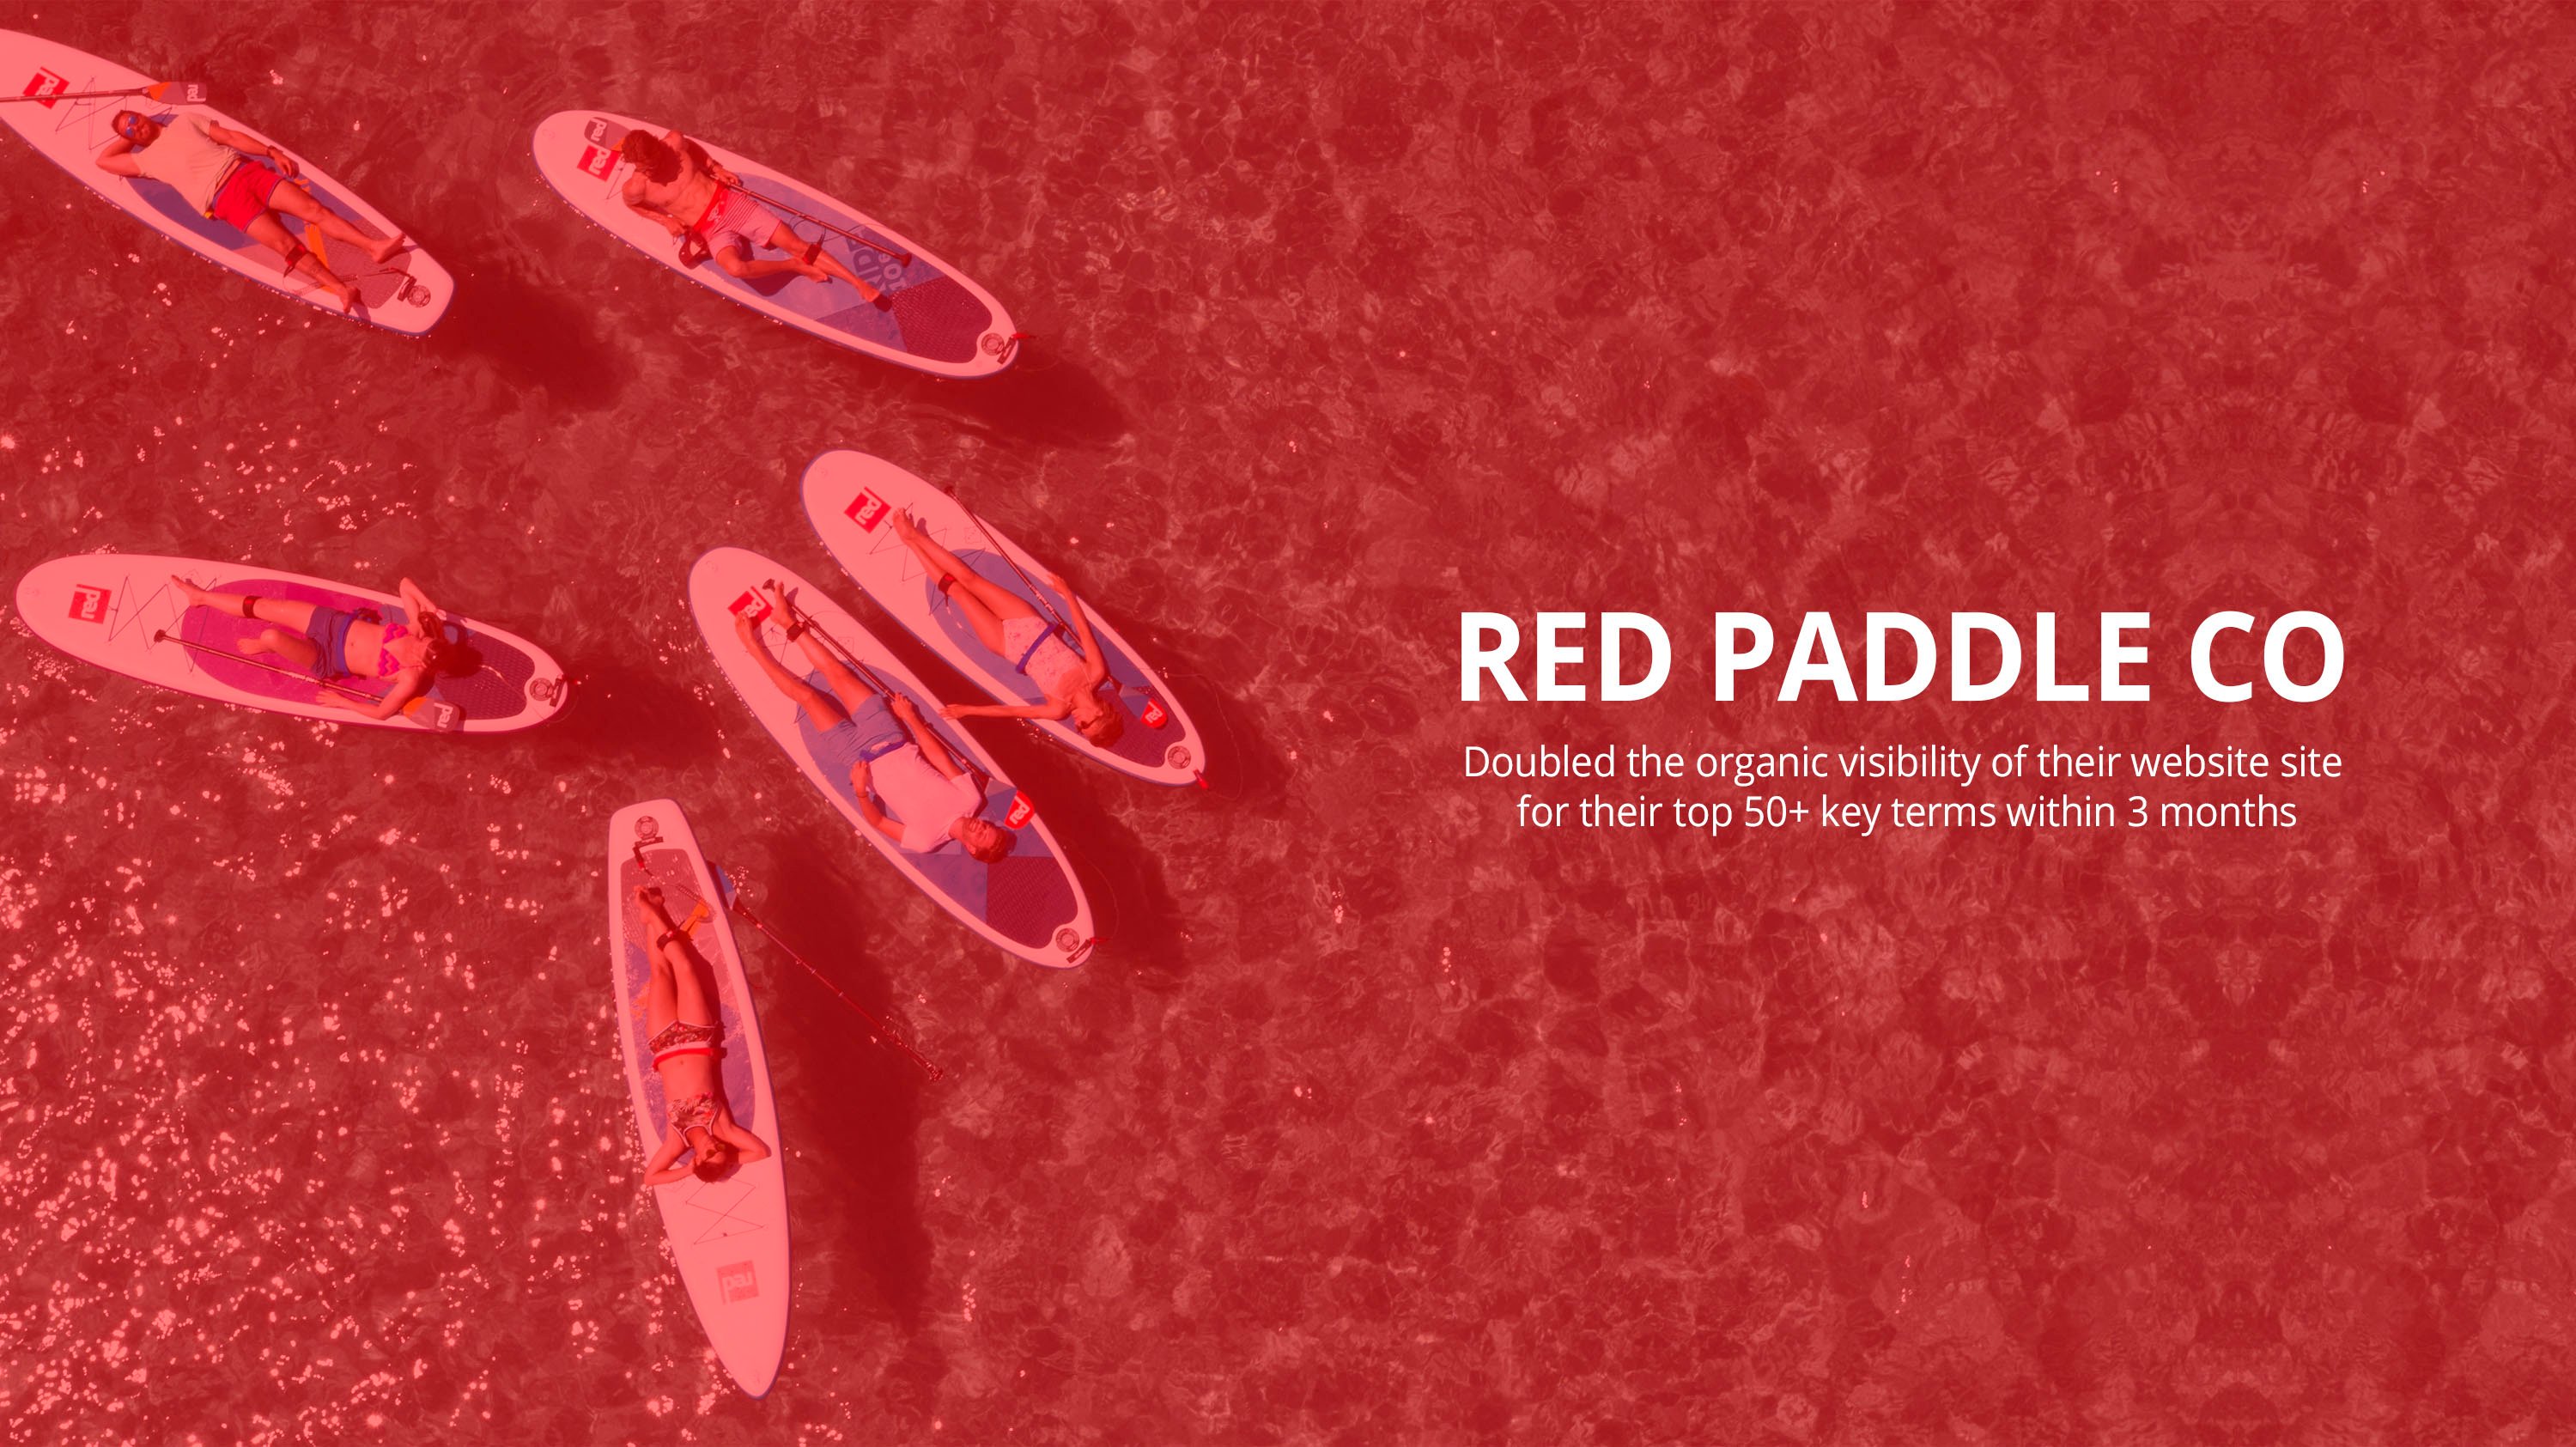 Red-Paddle-Co-organic-visibility-doubled-banner.jpg